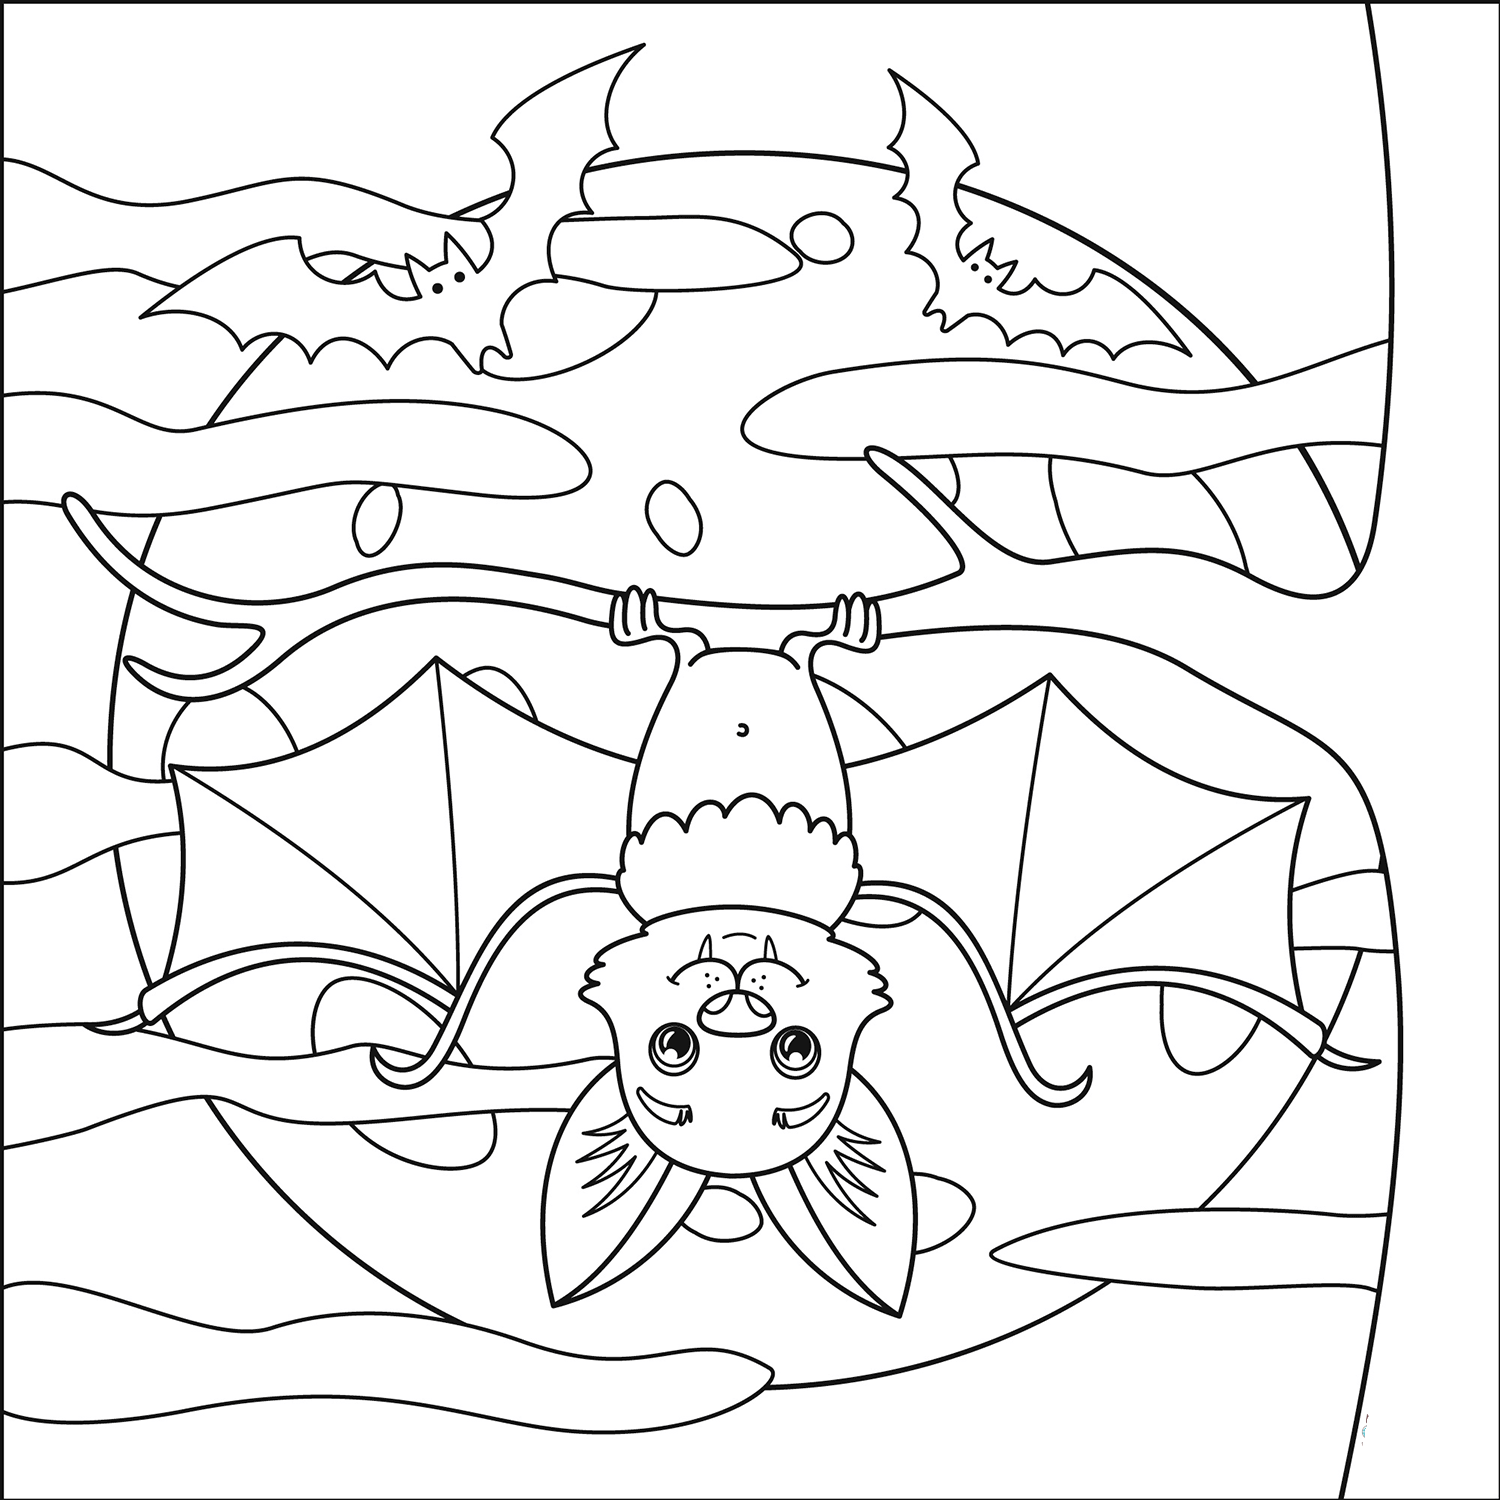 Learn To Draw Nice Bat Coloring Page